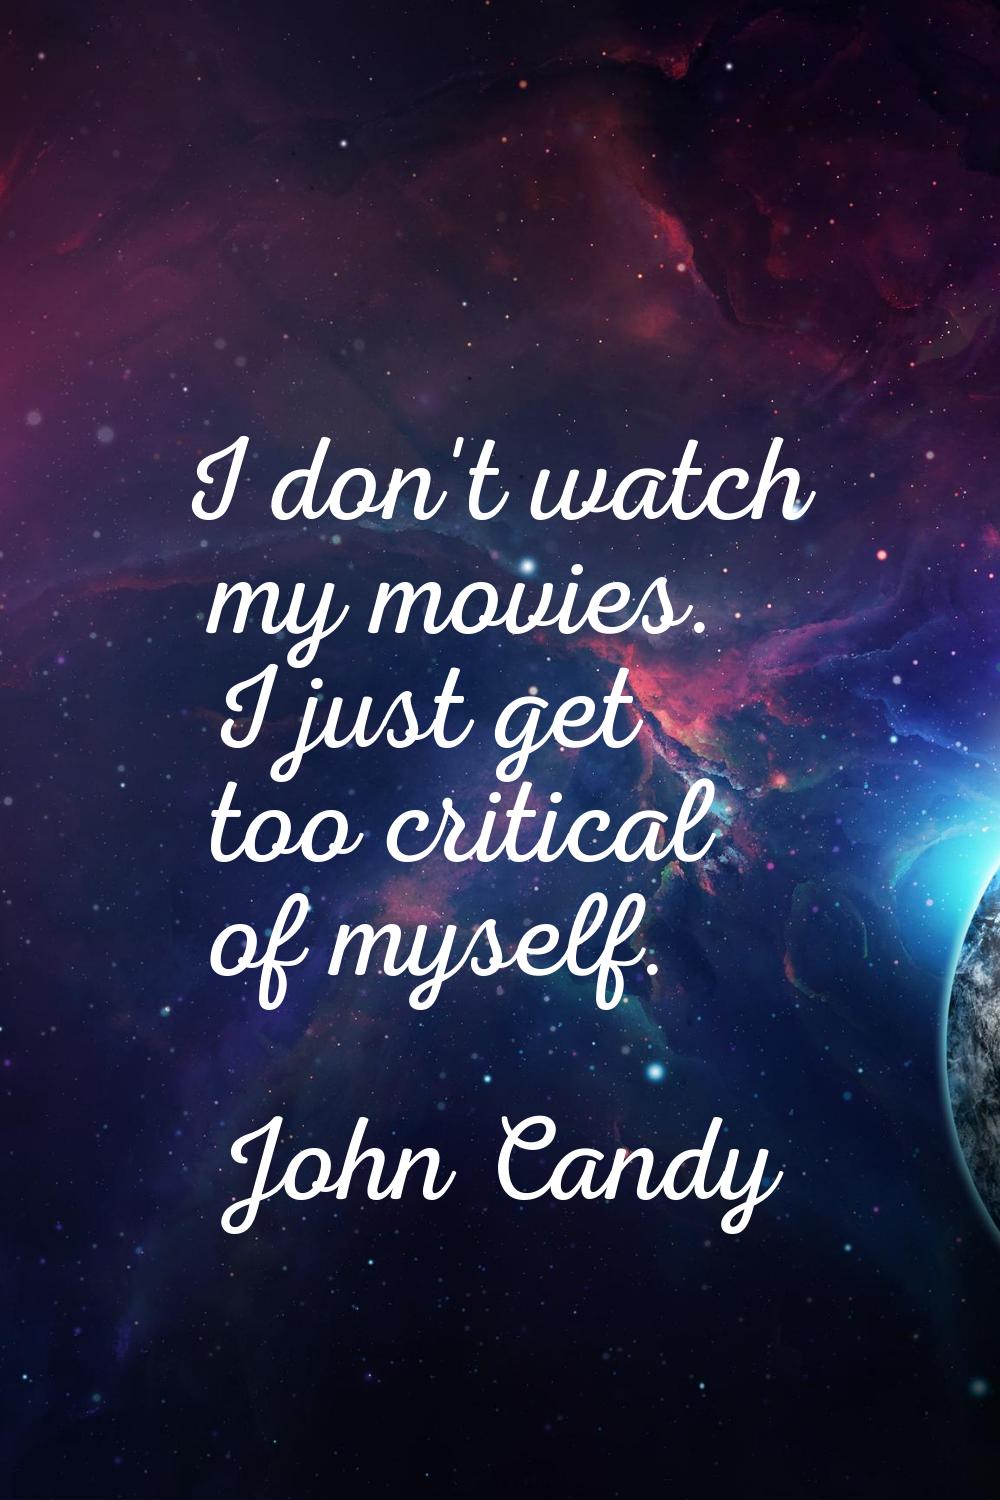 I don't watch my movies. I just get too critical of myself.